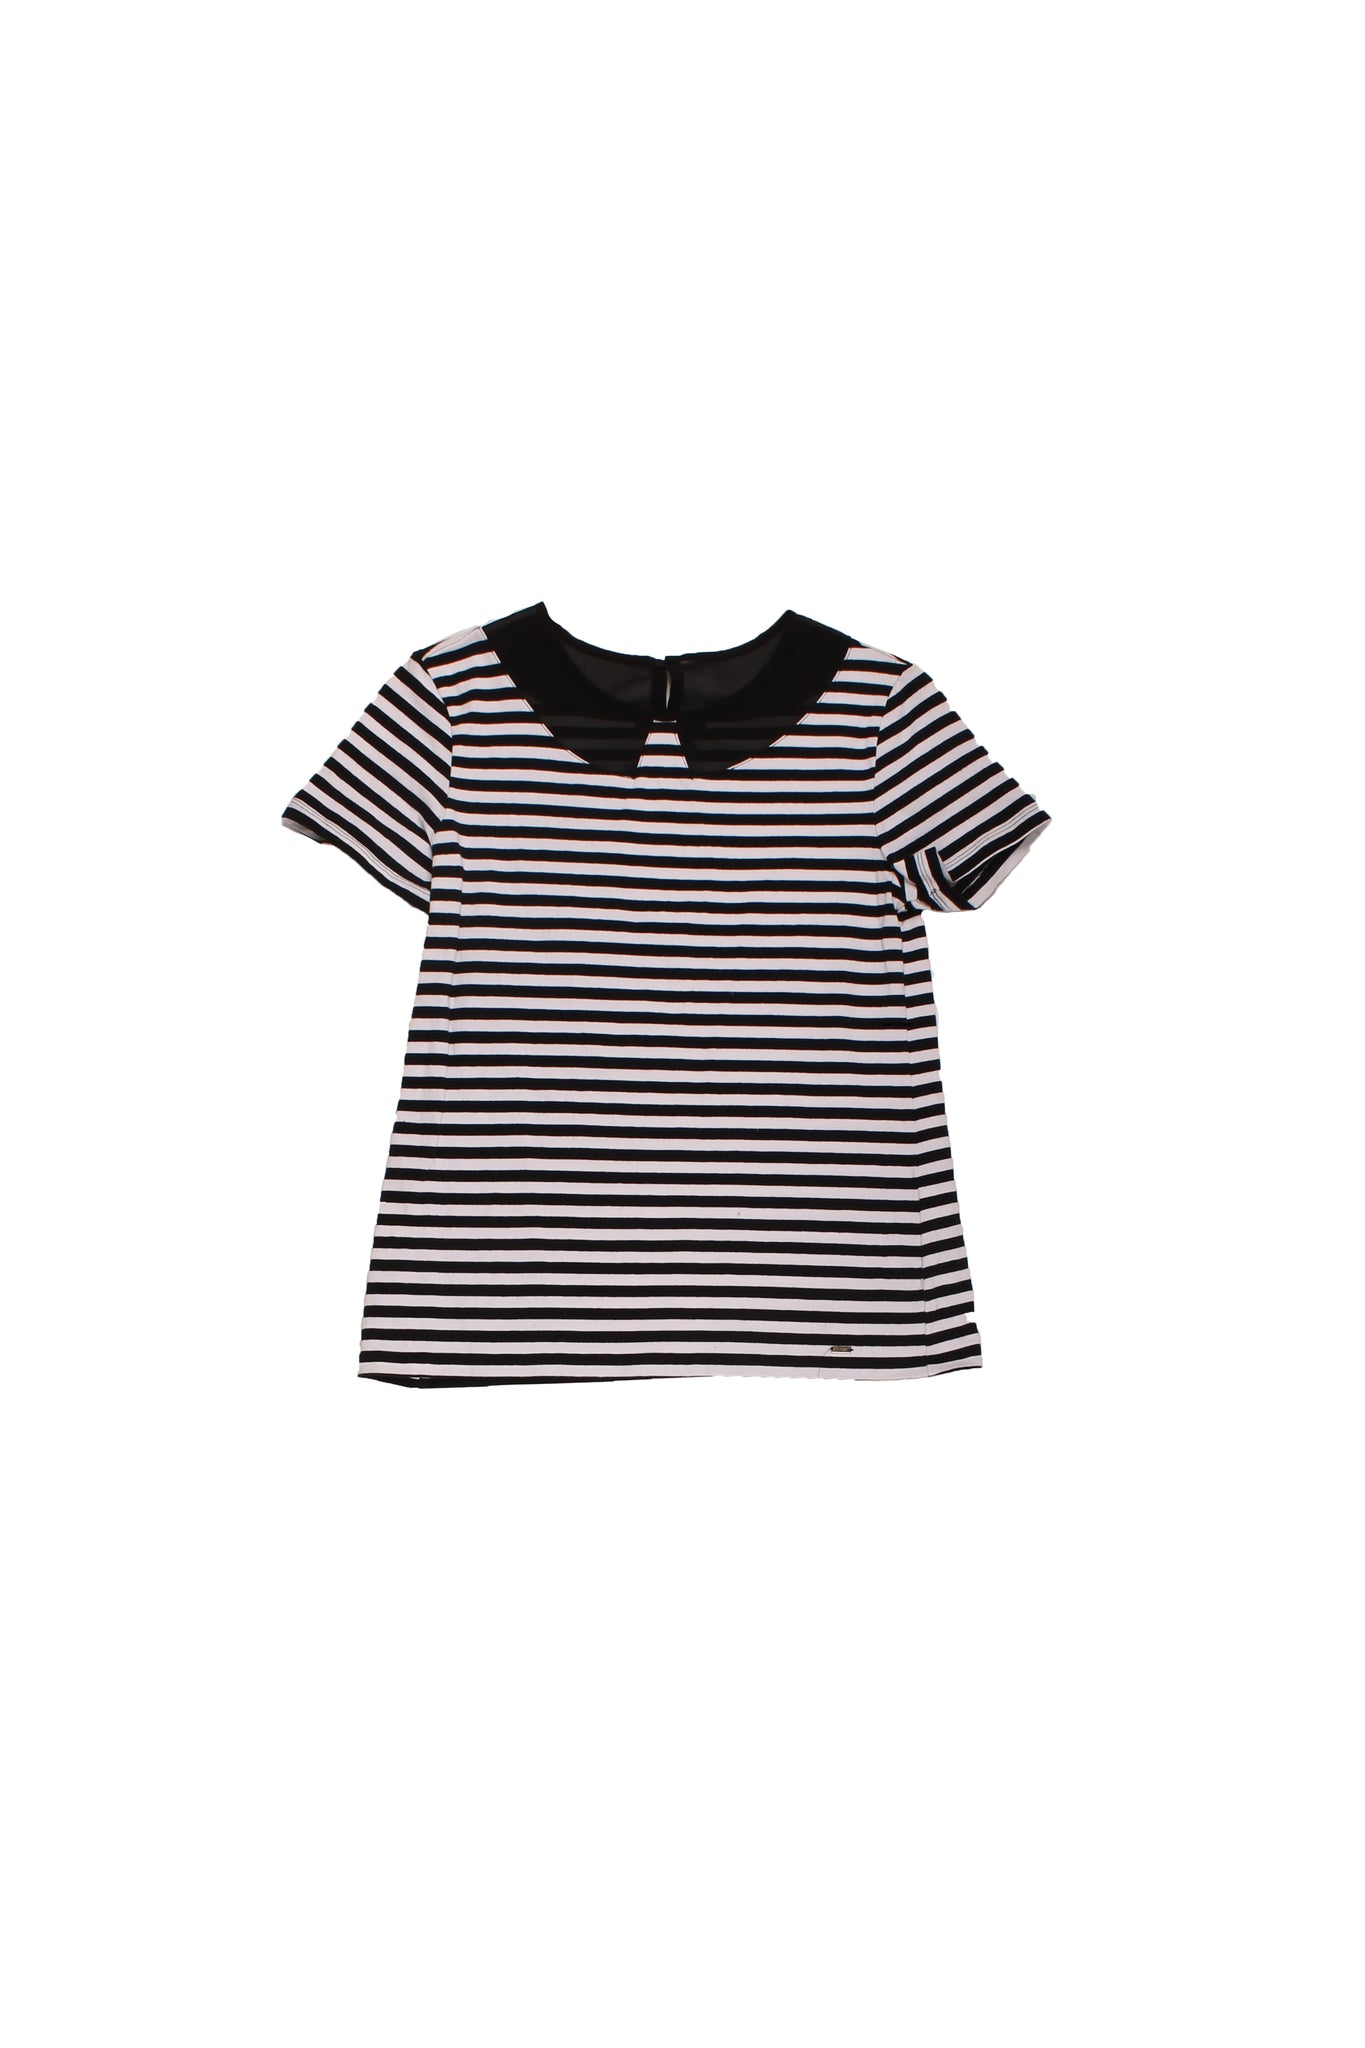 TOMMY HILFIGER - Tommy Hilfiger - Blusa Lineas Blanco Con Negro